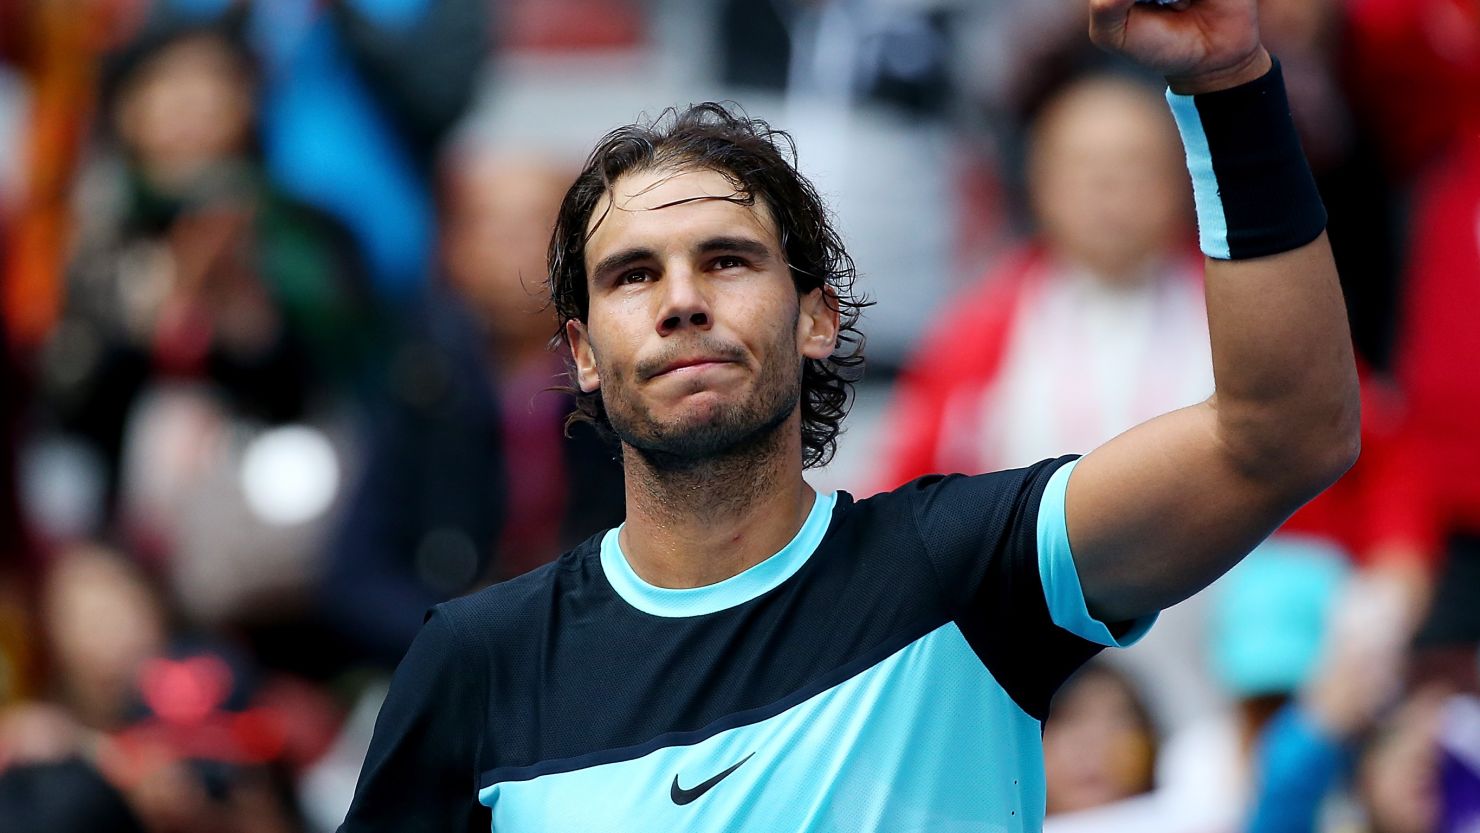 A delighted Rafael Nadal celebrates his victory over Fabio Fognini in the semifinals of the China Open in Beijing.